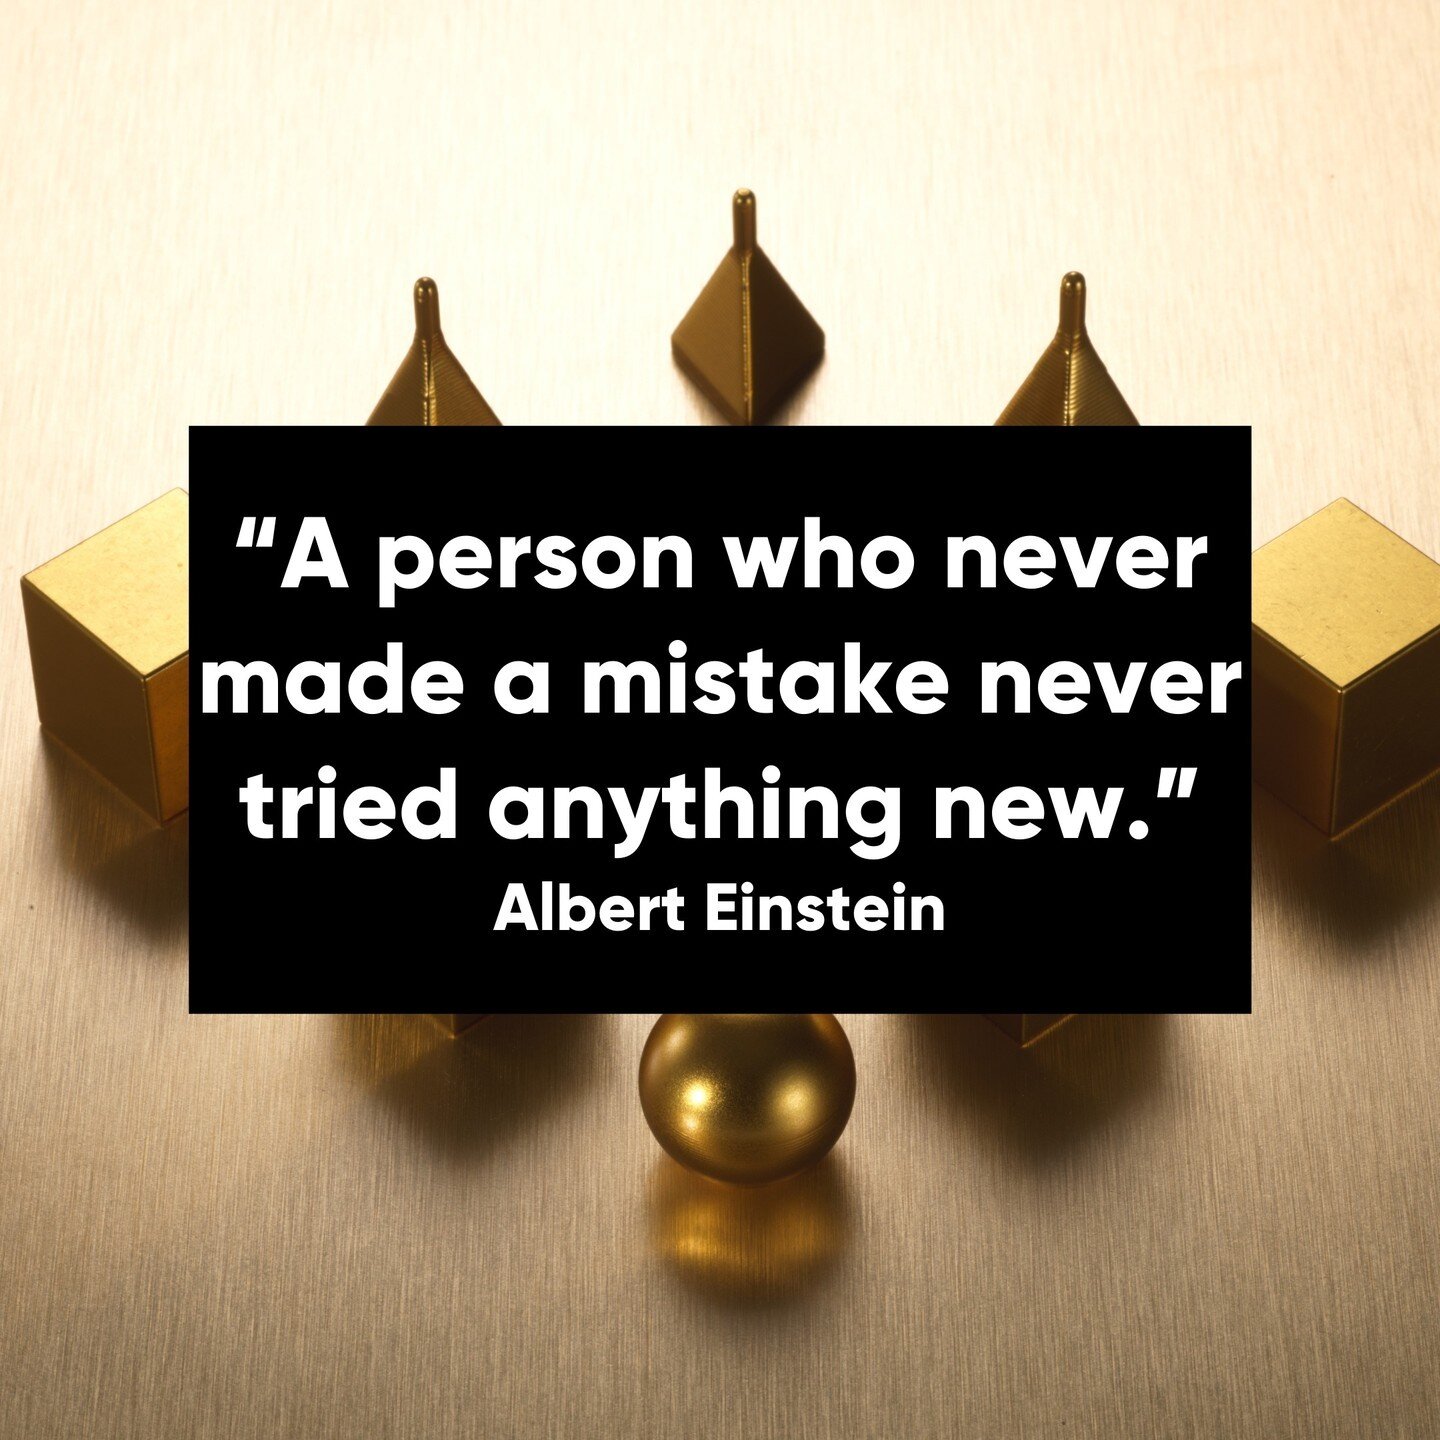 &ldquo;A person who never made a mistake never tried anything new.&rdquo;

This quote by German-born theoretical physicist Albert Einstein is definitely inspiring us to try something new.

If you make mistakes on your first ever game of Prometheus do